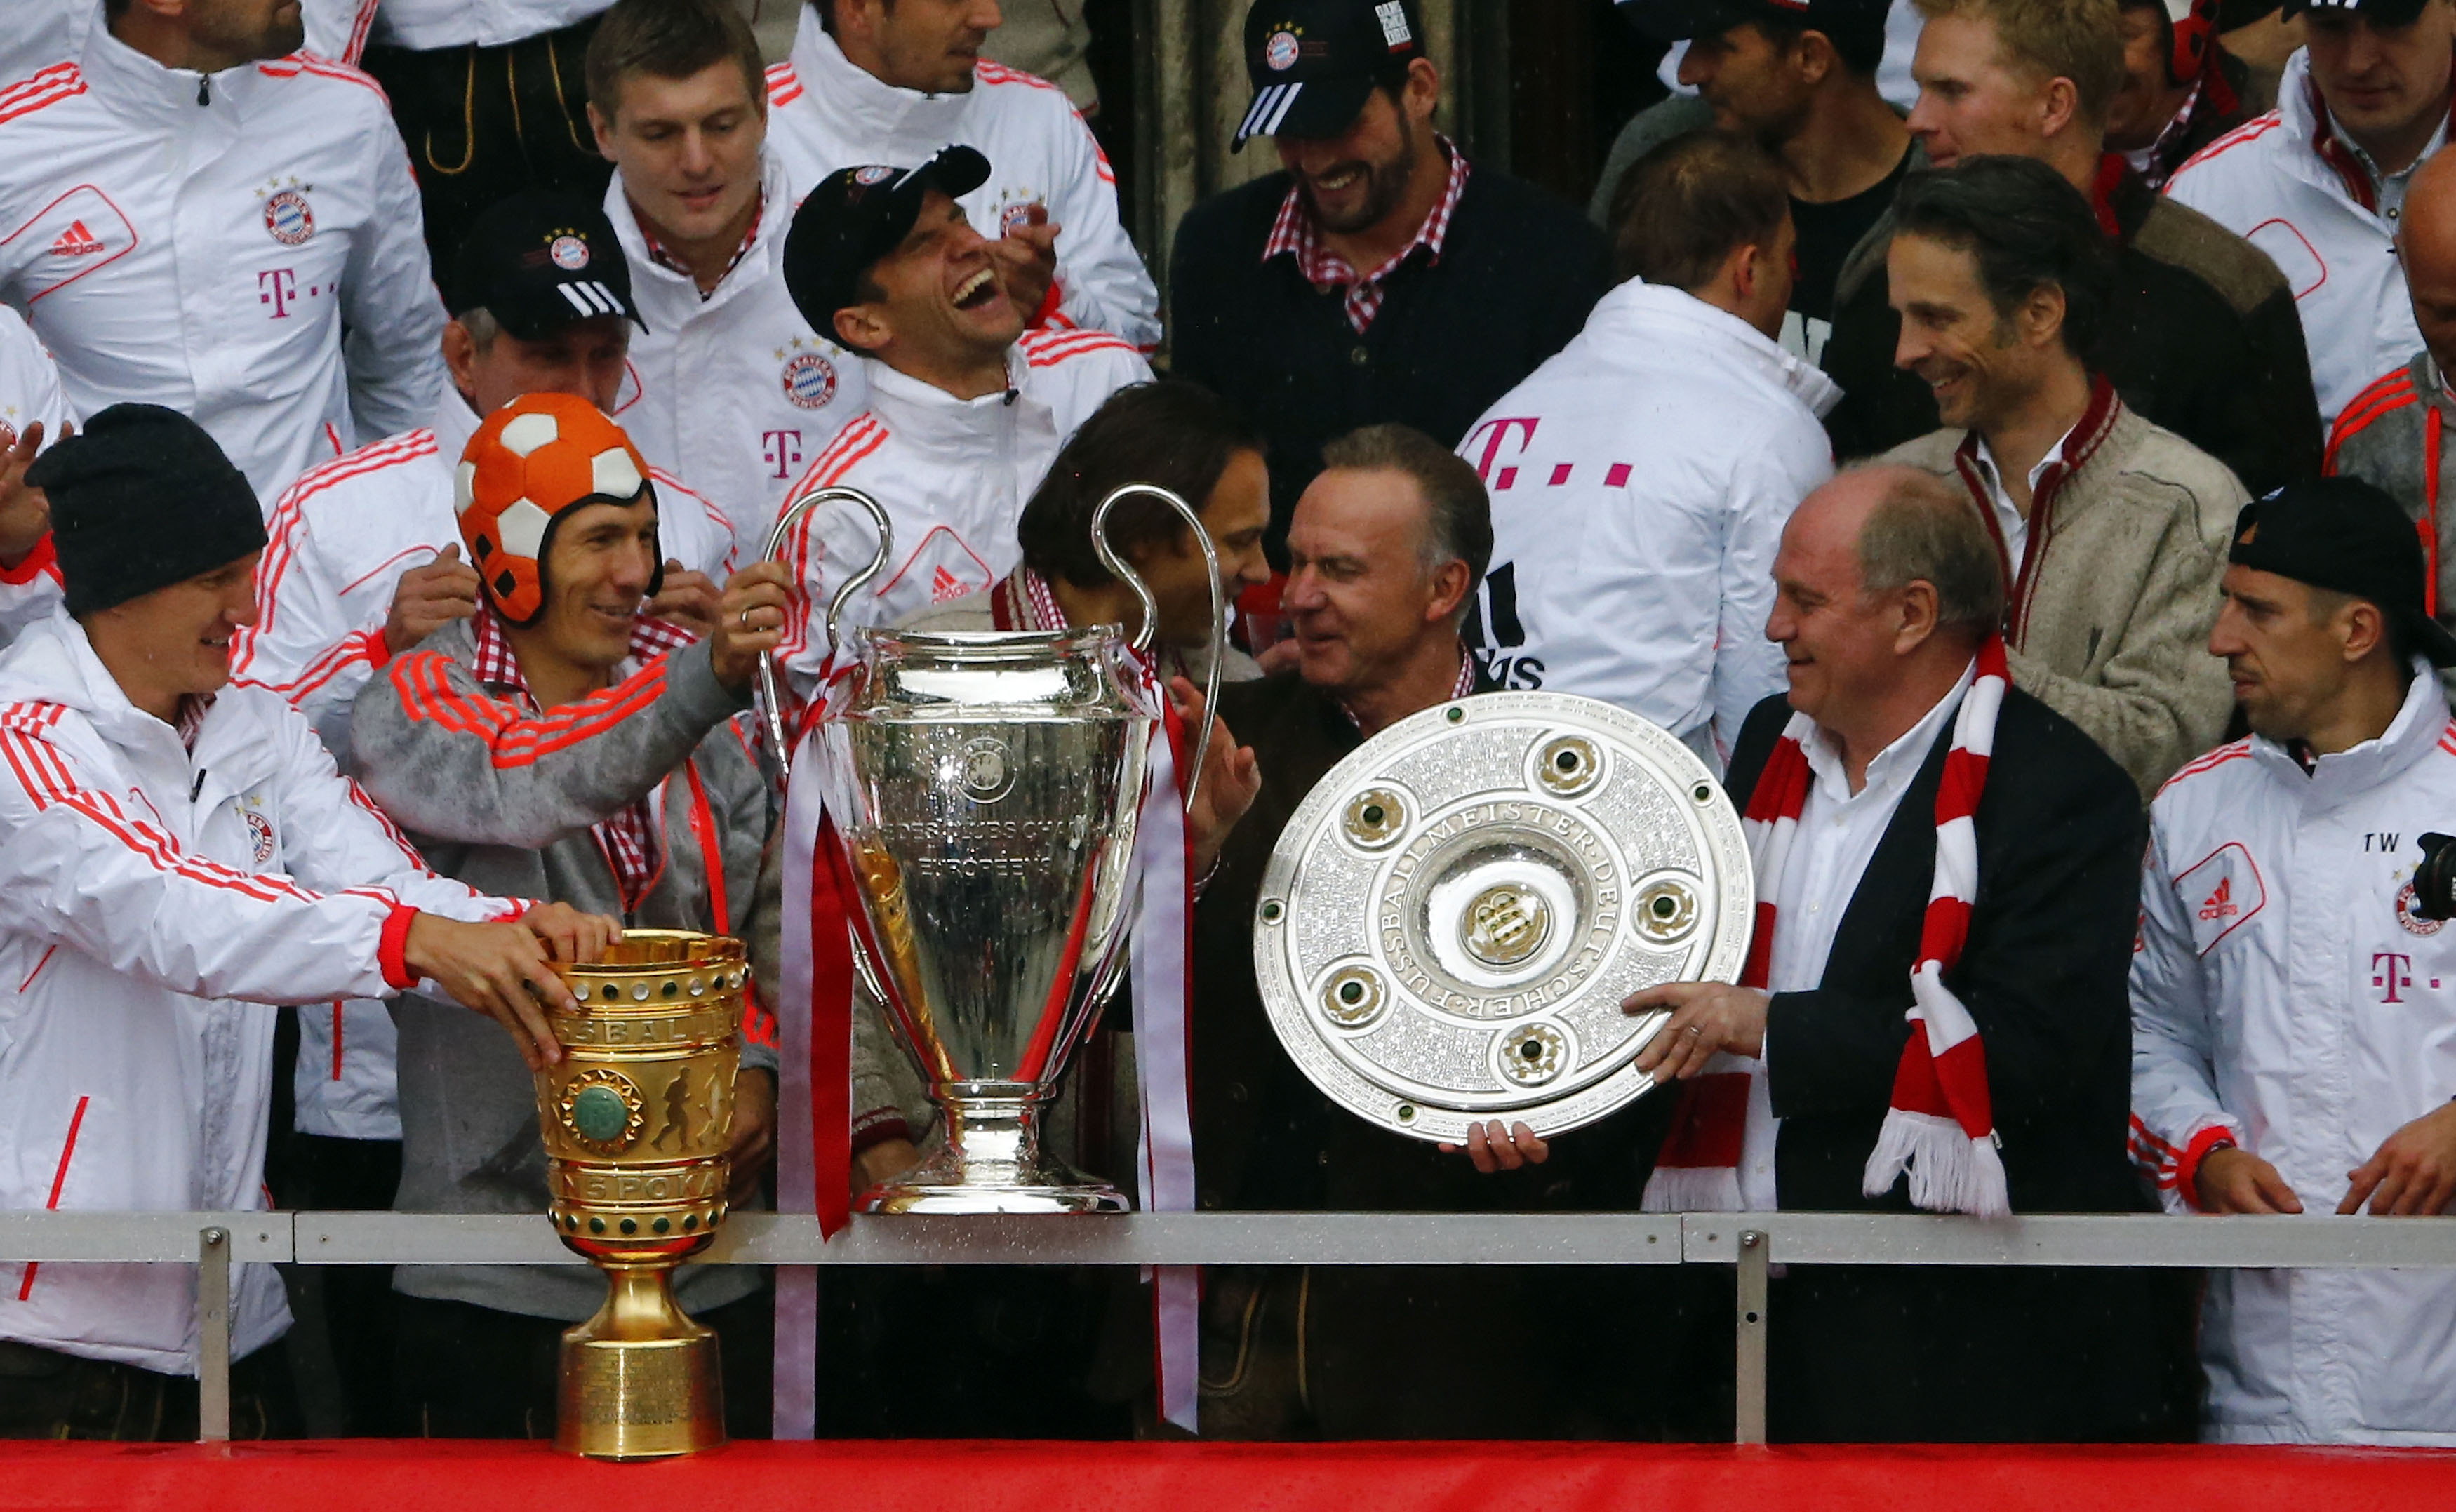 Bayern Munich's players and Chief Executive Karl-Heinz Rummenigge (3R) and President Uli Hoeness (2R) hold up German soccer cup (DFB Pokal), Champions League and German soccer championship Bundesliga trophies as they stand on the balcony of the town hall in Munich June 2, 2013. Bayern Munich completed the treble by beating VfB Stuttgart 3-2 in the German Cup final on June 1, 2013, adding the trophy to the Champions League and Bundesliga titles they have already won this season. REUTERS/Michael Dalder (GERMANY - Tags: SPORT SOCCER) - RTX1099B